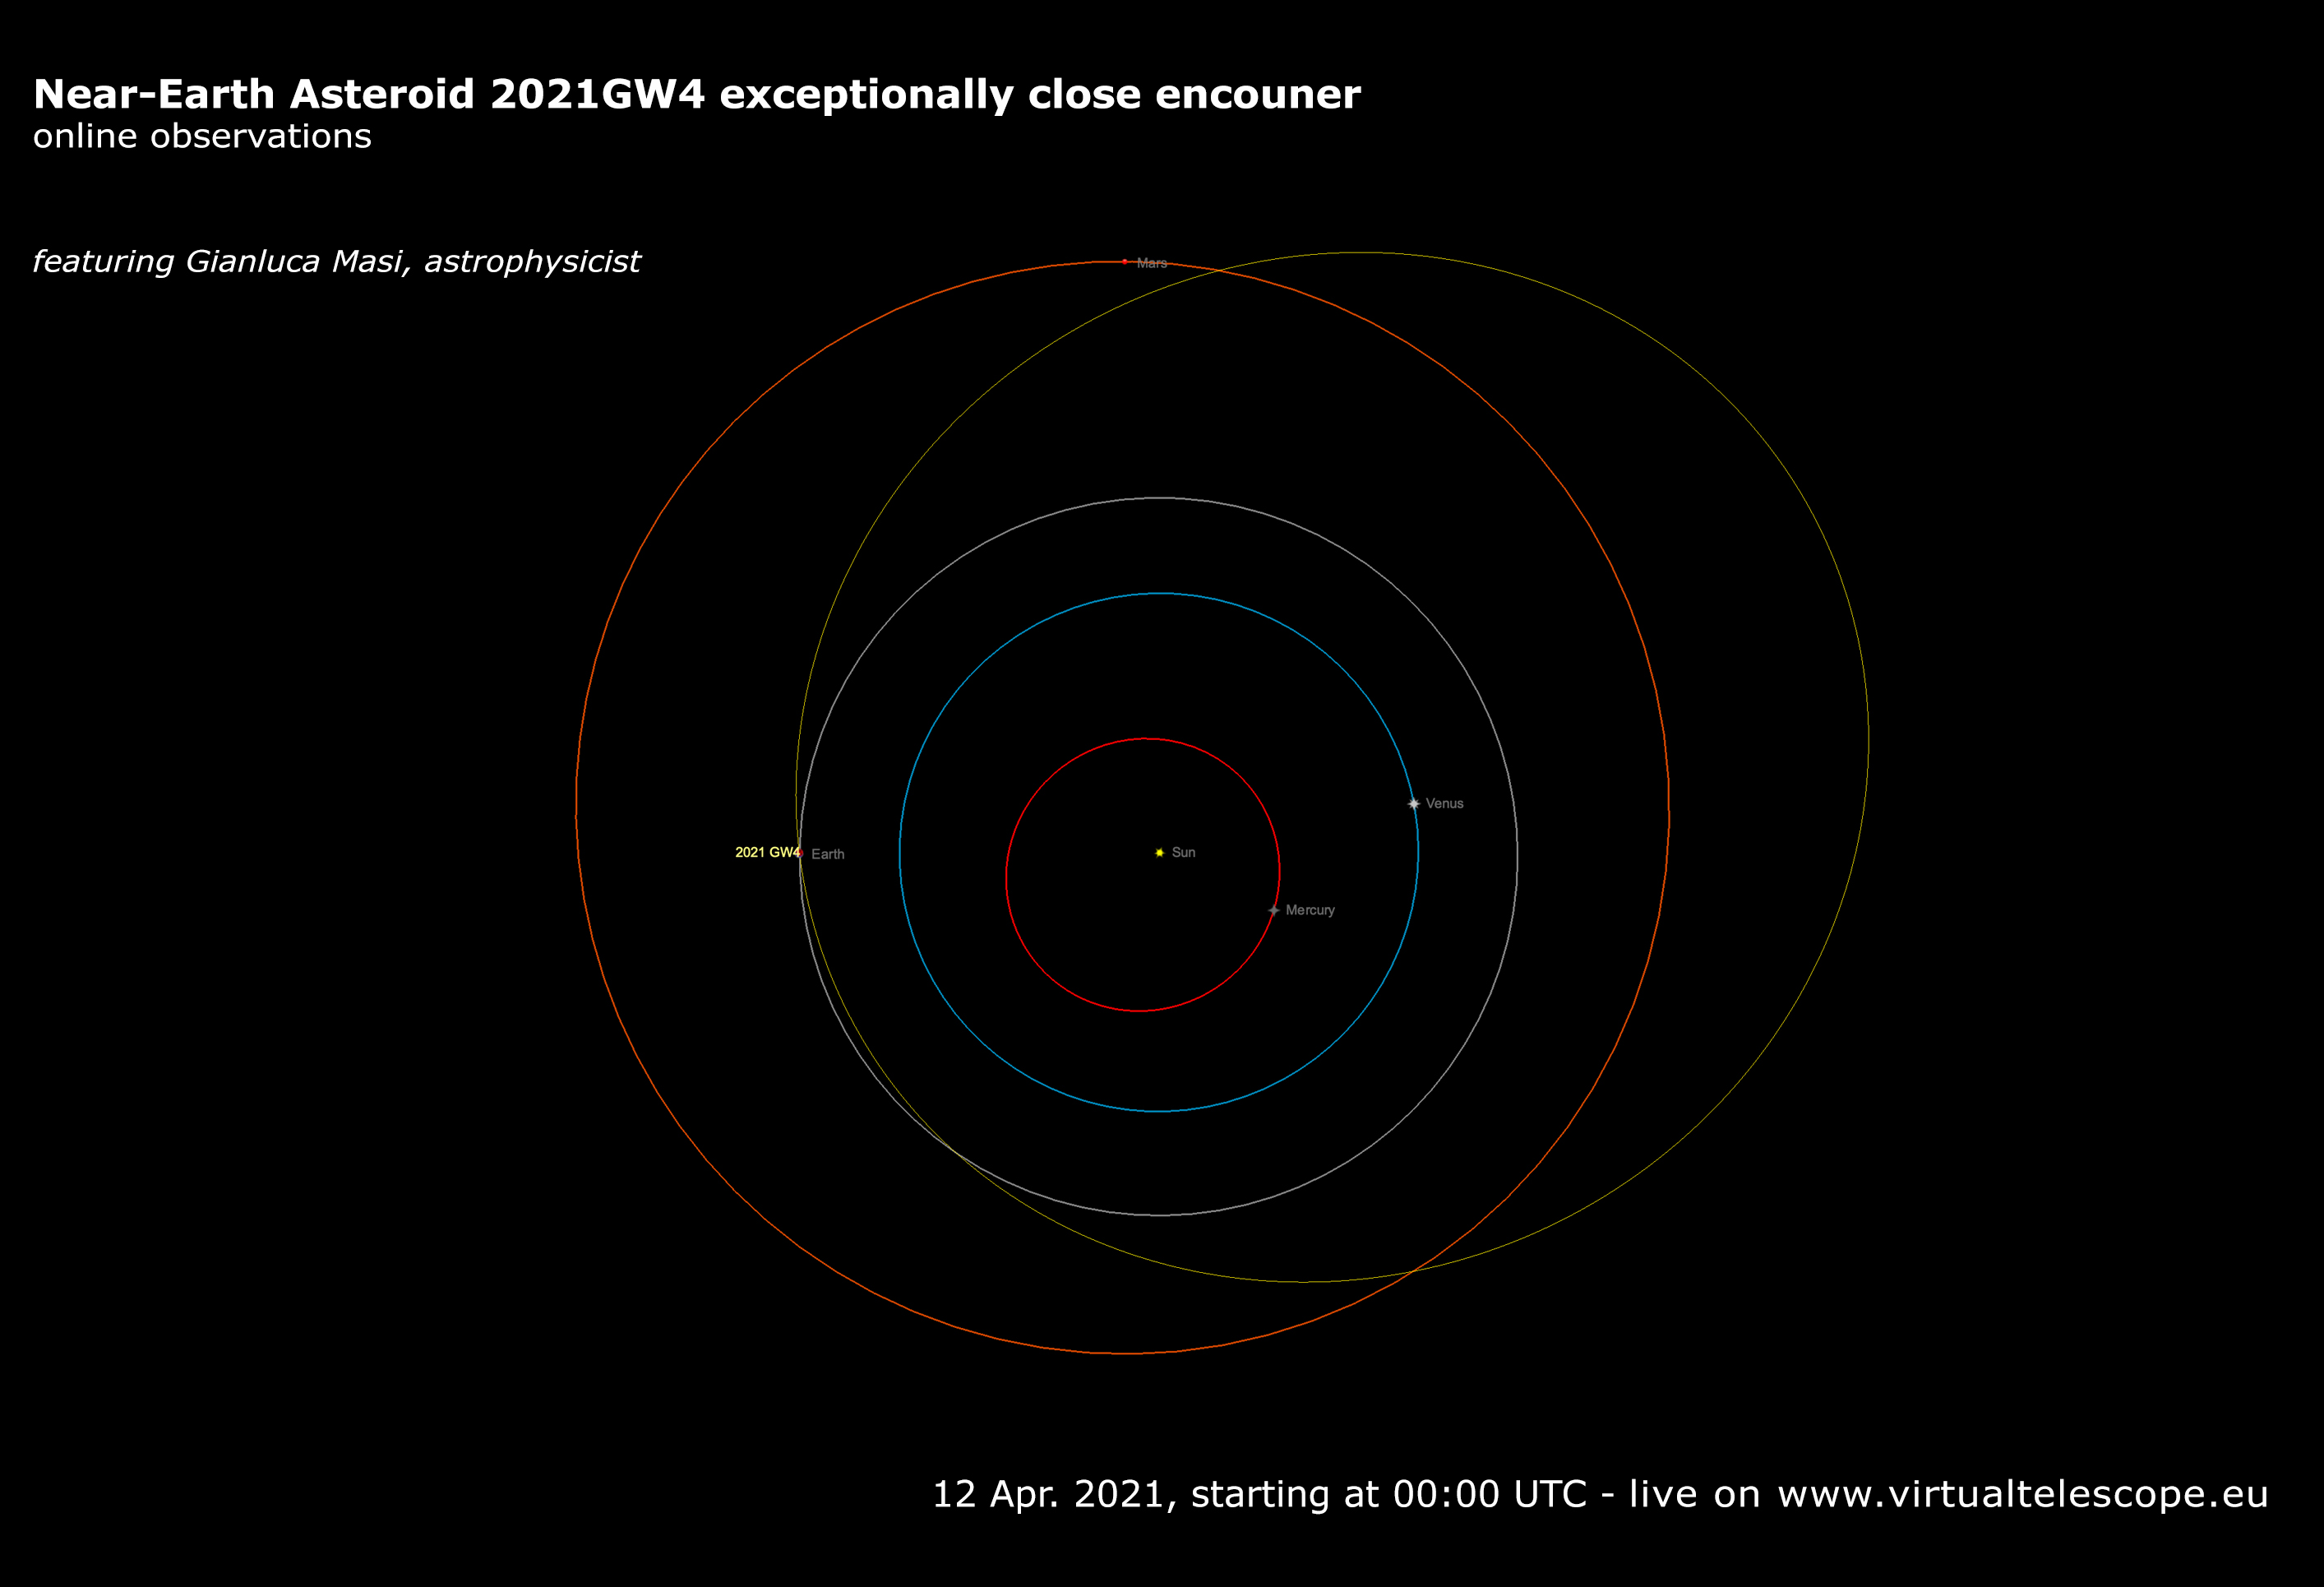 Near-Earth asteroid 2021 GW4: poster of the event.